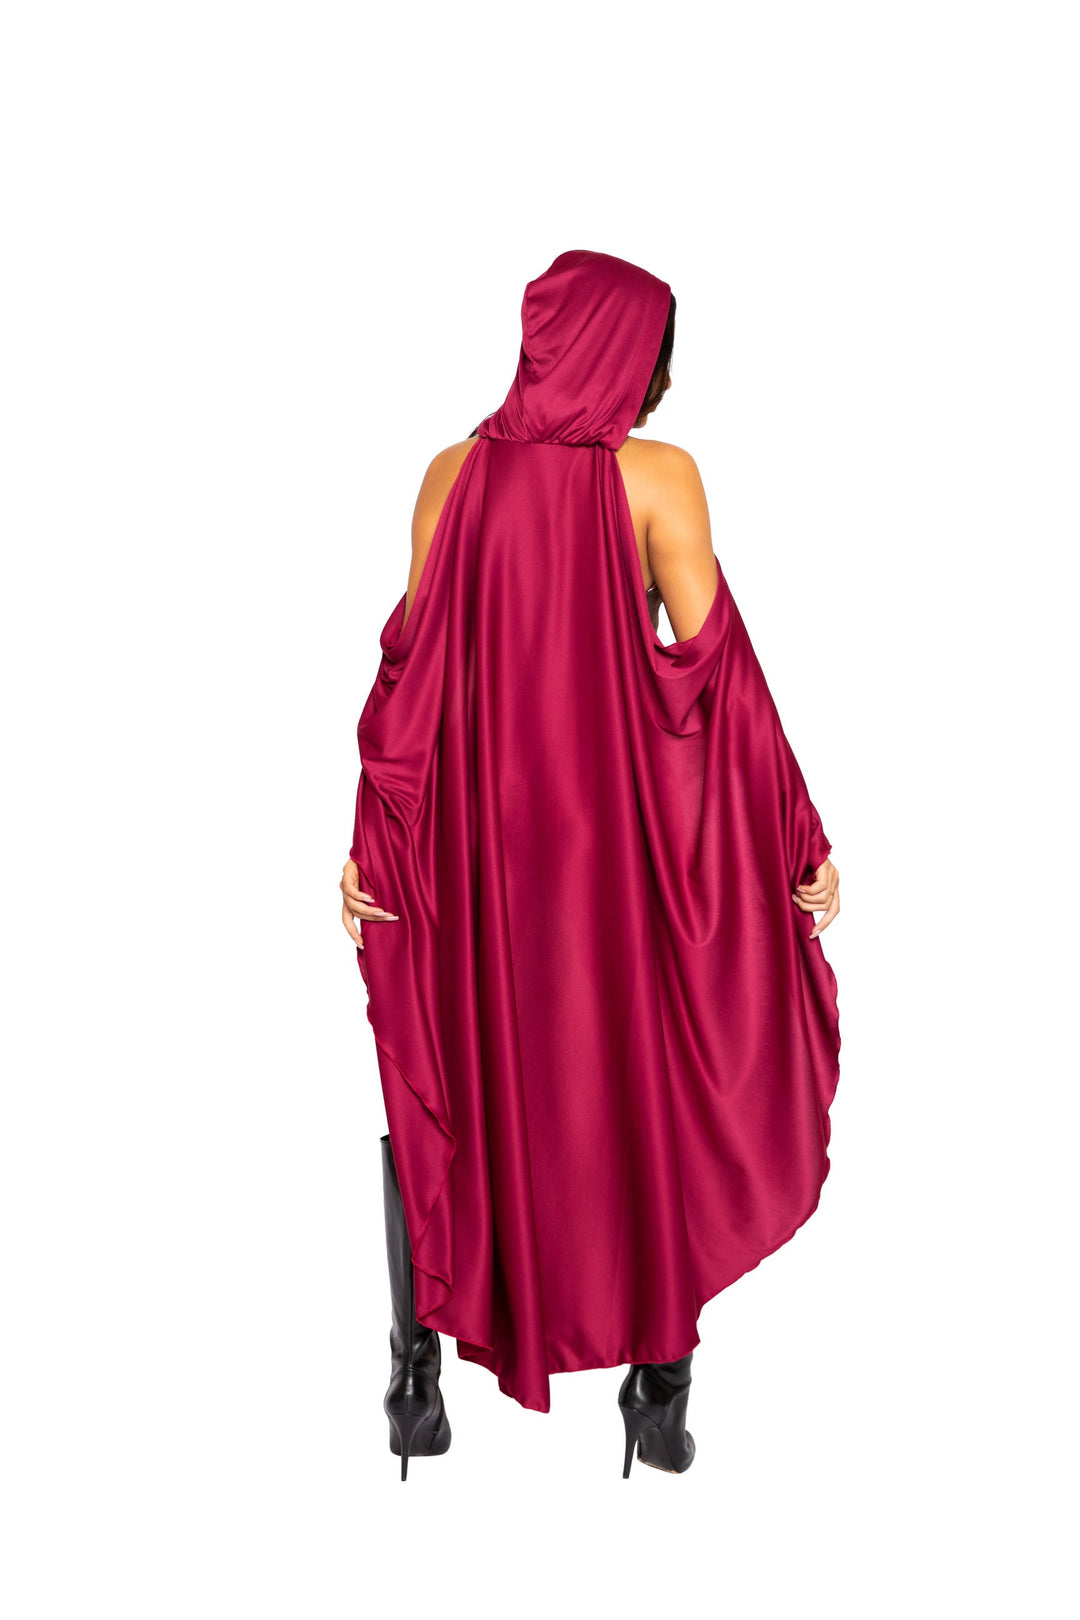 Sexy Red Riding Hood Women's Costume